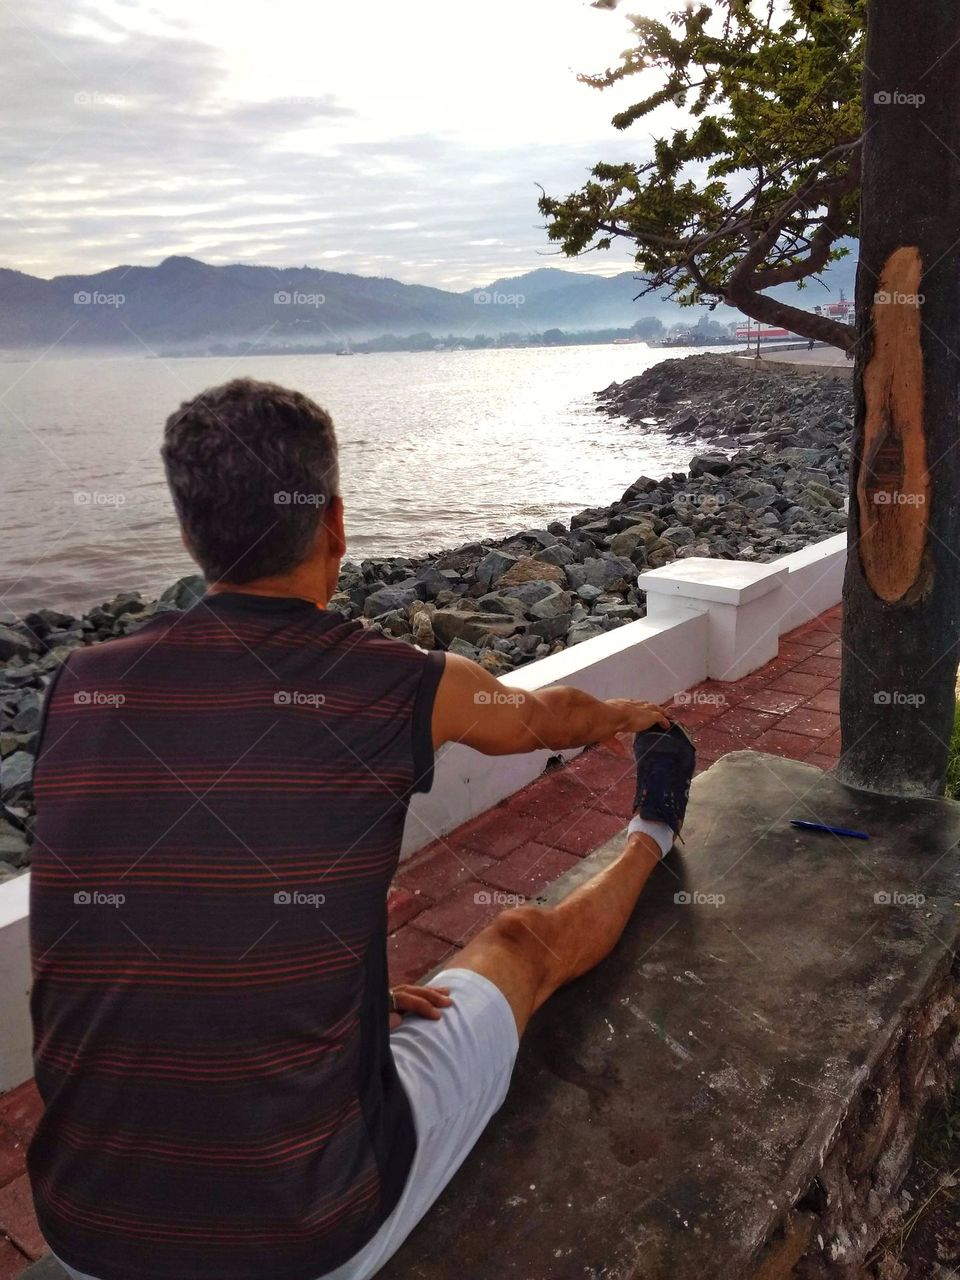 Morning exercise by the beach,  stretching out with a beautiful view, from Farol,  Díli,  East Timor